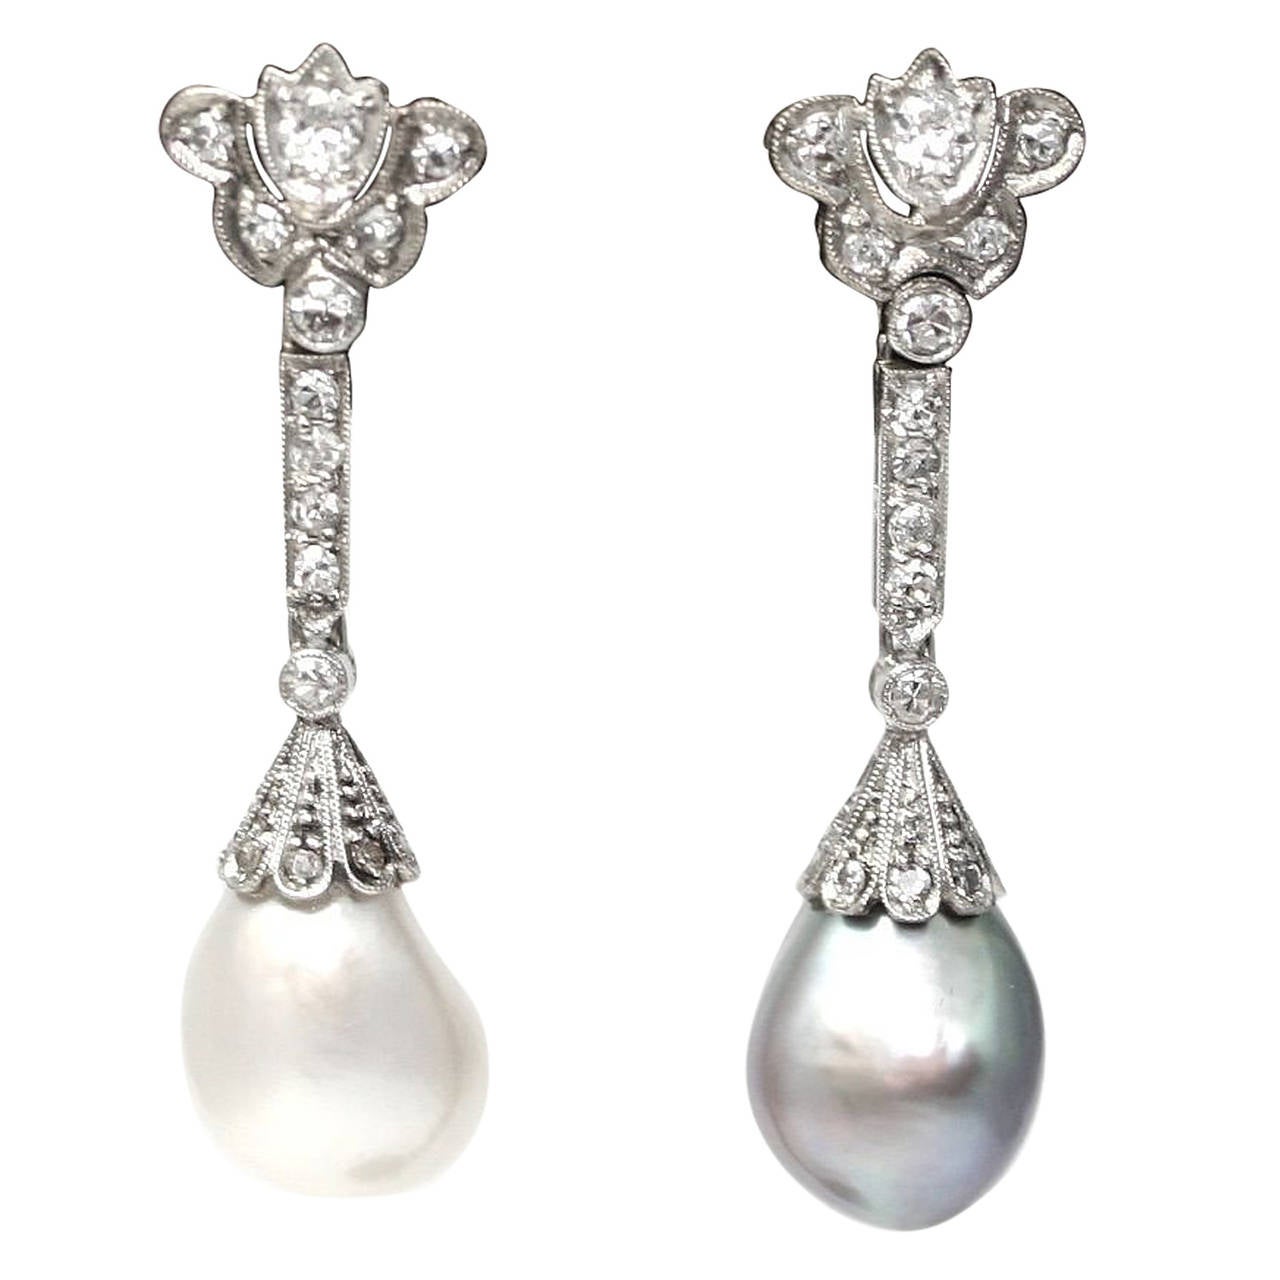 ART DECO Pair of ear pendants in platinum set with a line of old or 8/8 cut diamonds retaining a natural pearls (sea water), one cream white of 6.30 carats, one gray of 5.47 carats, length: about 3.6 cm, LFG certificates (7,4 grams)